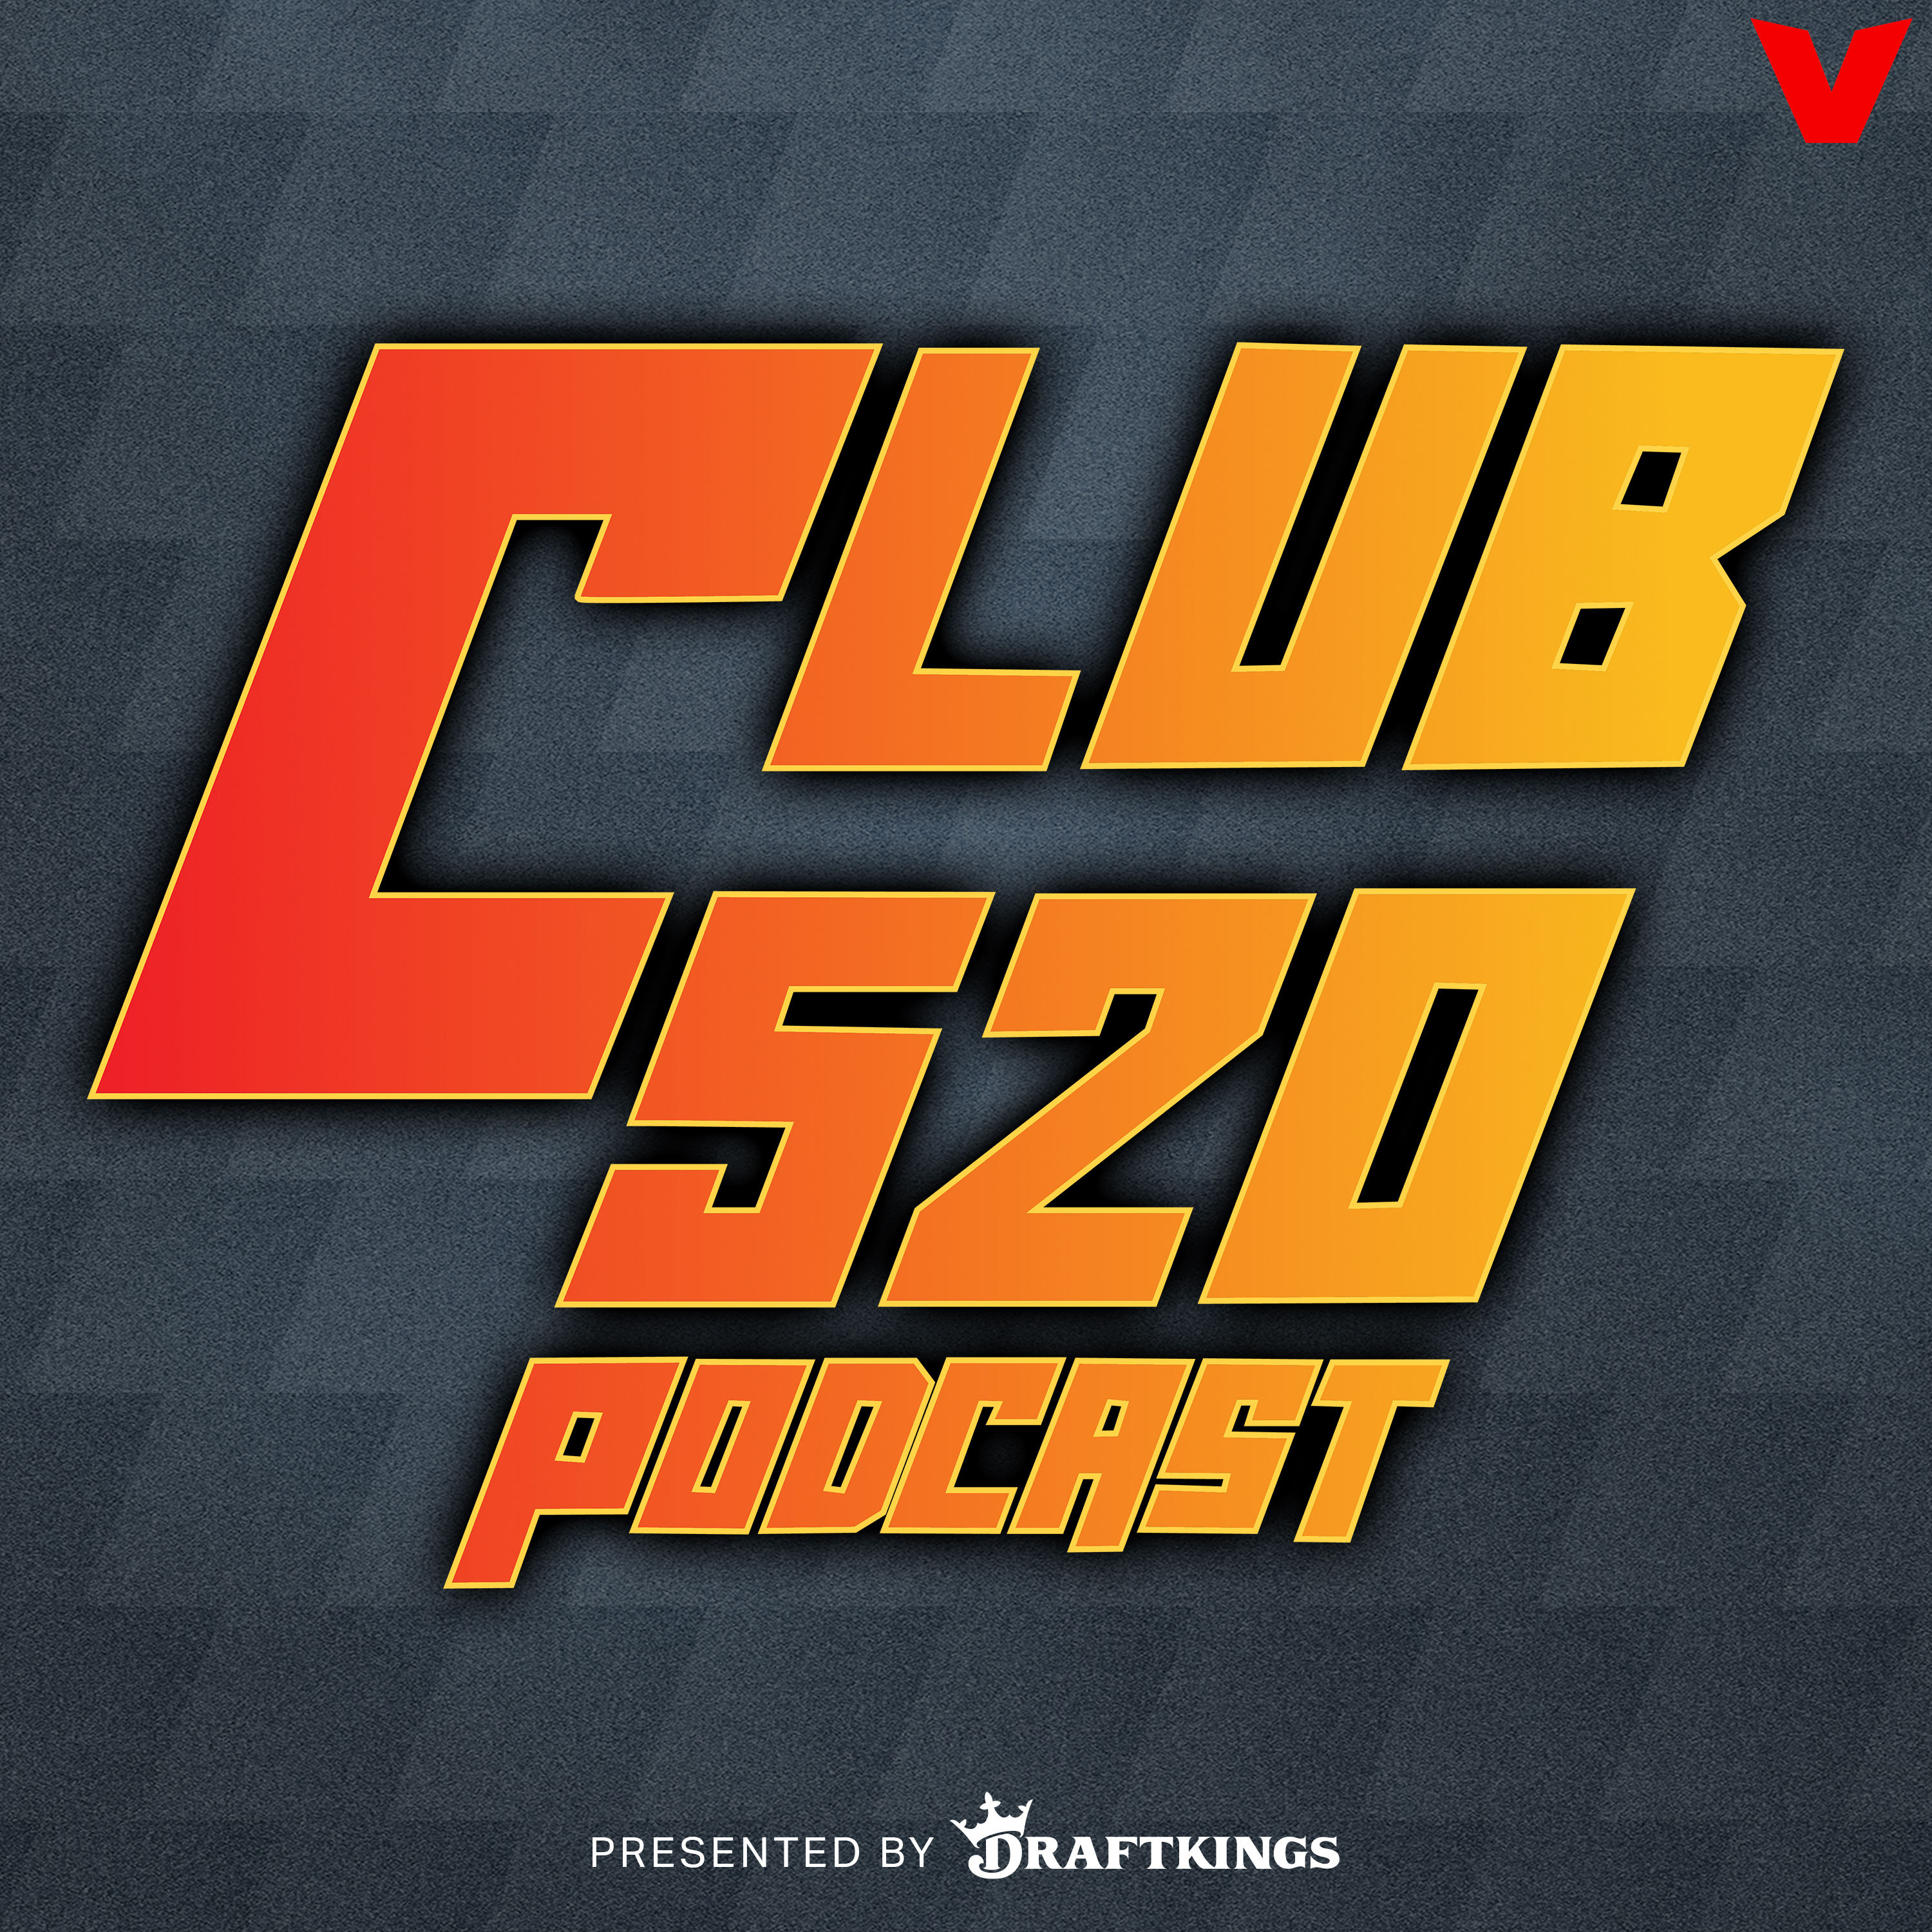 Club 520 - Jeff Teague answers whether Kanye West is the GOAT, why Big 3 could win Olympic gold